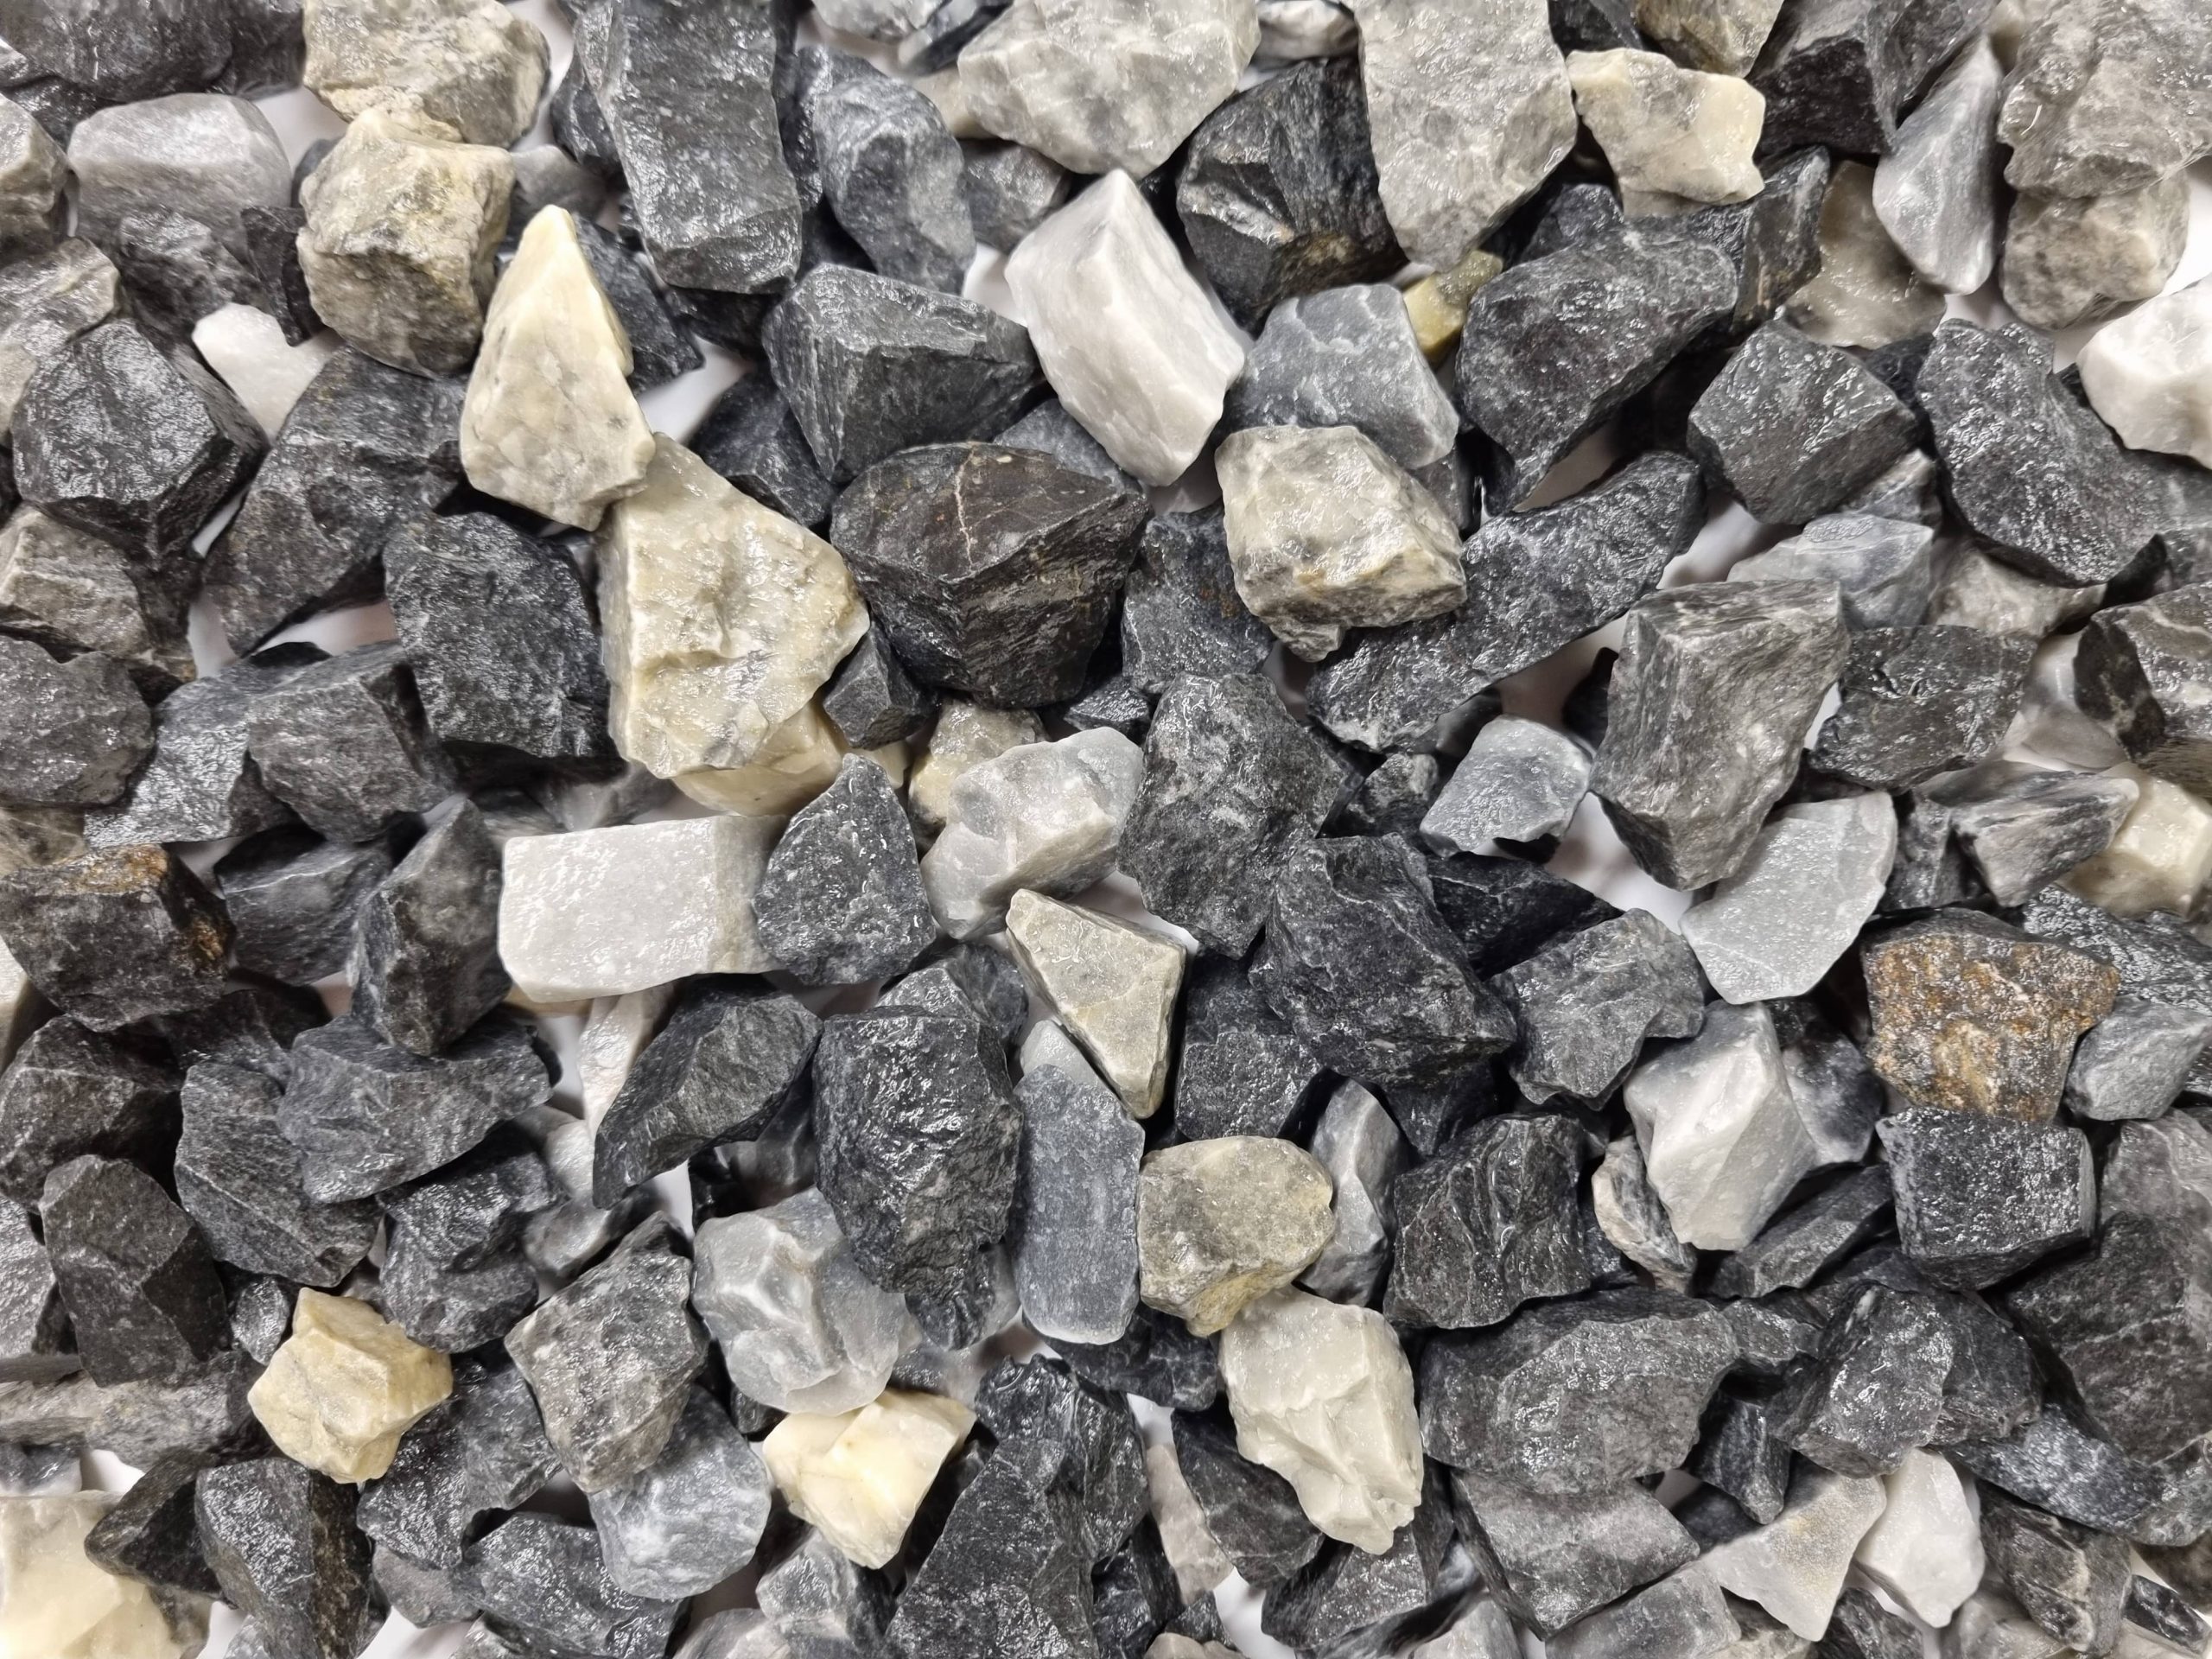 Black Ice Gravel for landscaping projects and designs